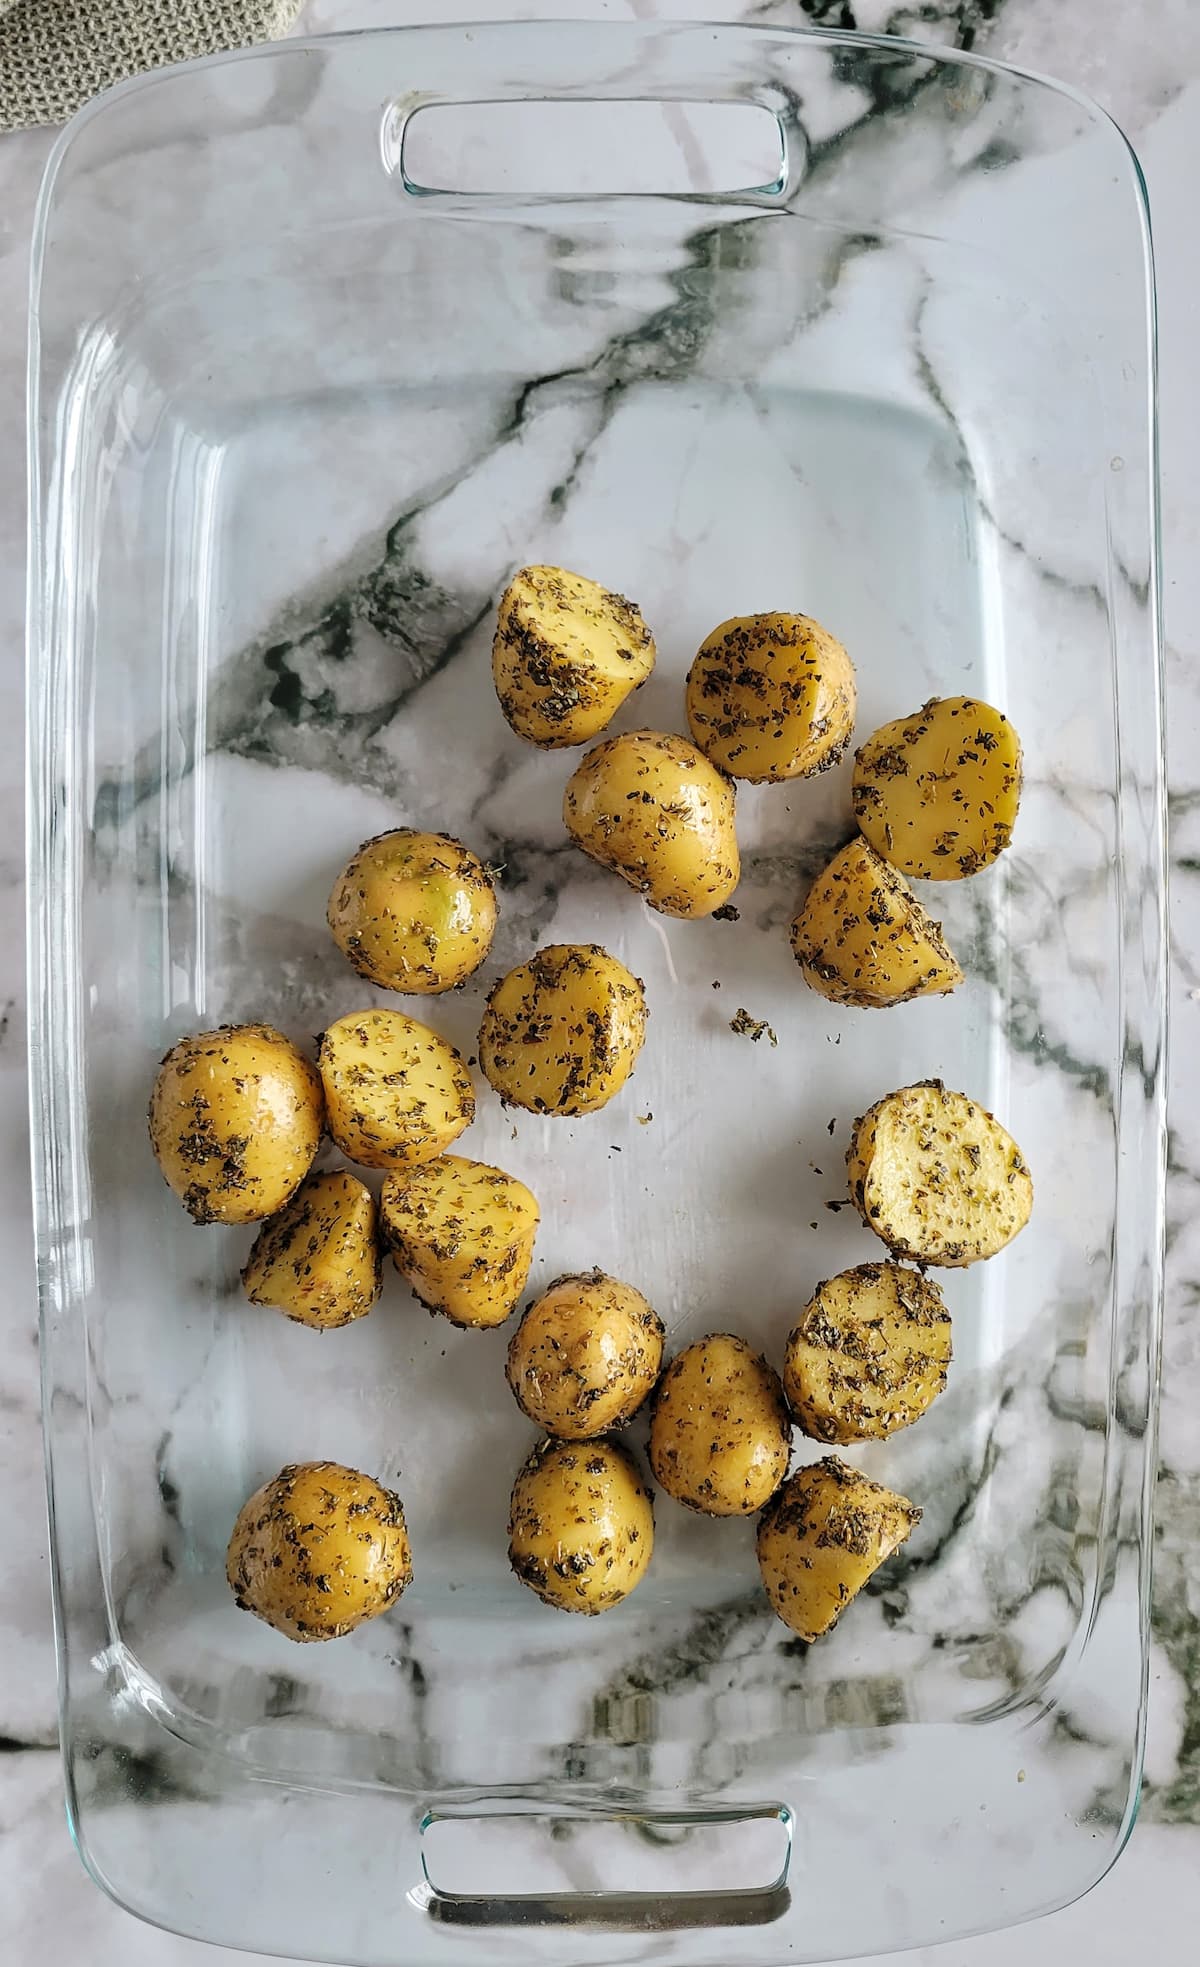 halved, seasoned baby potatoes at the bottom of a glass baking dish